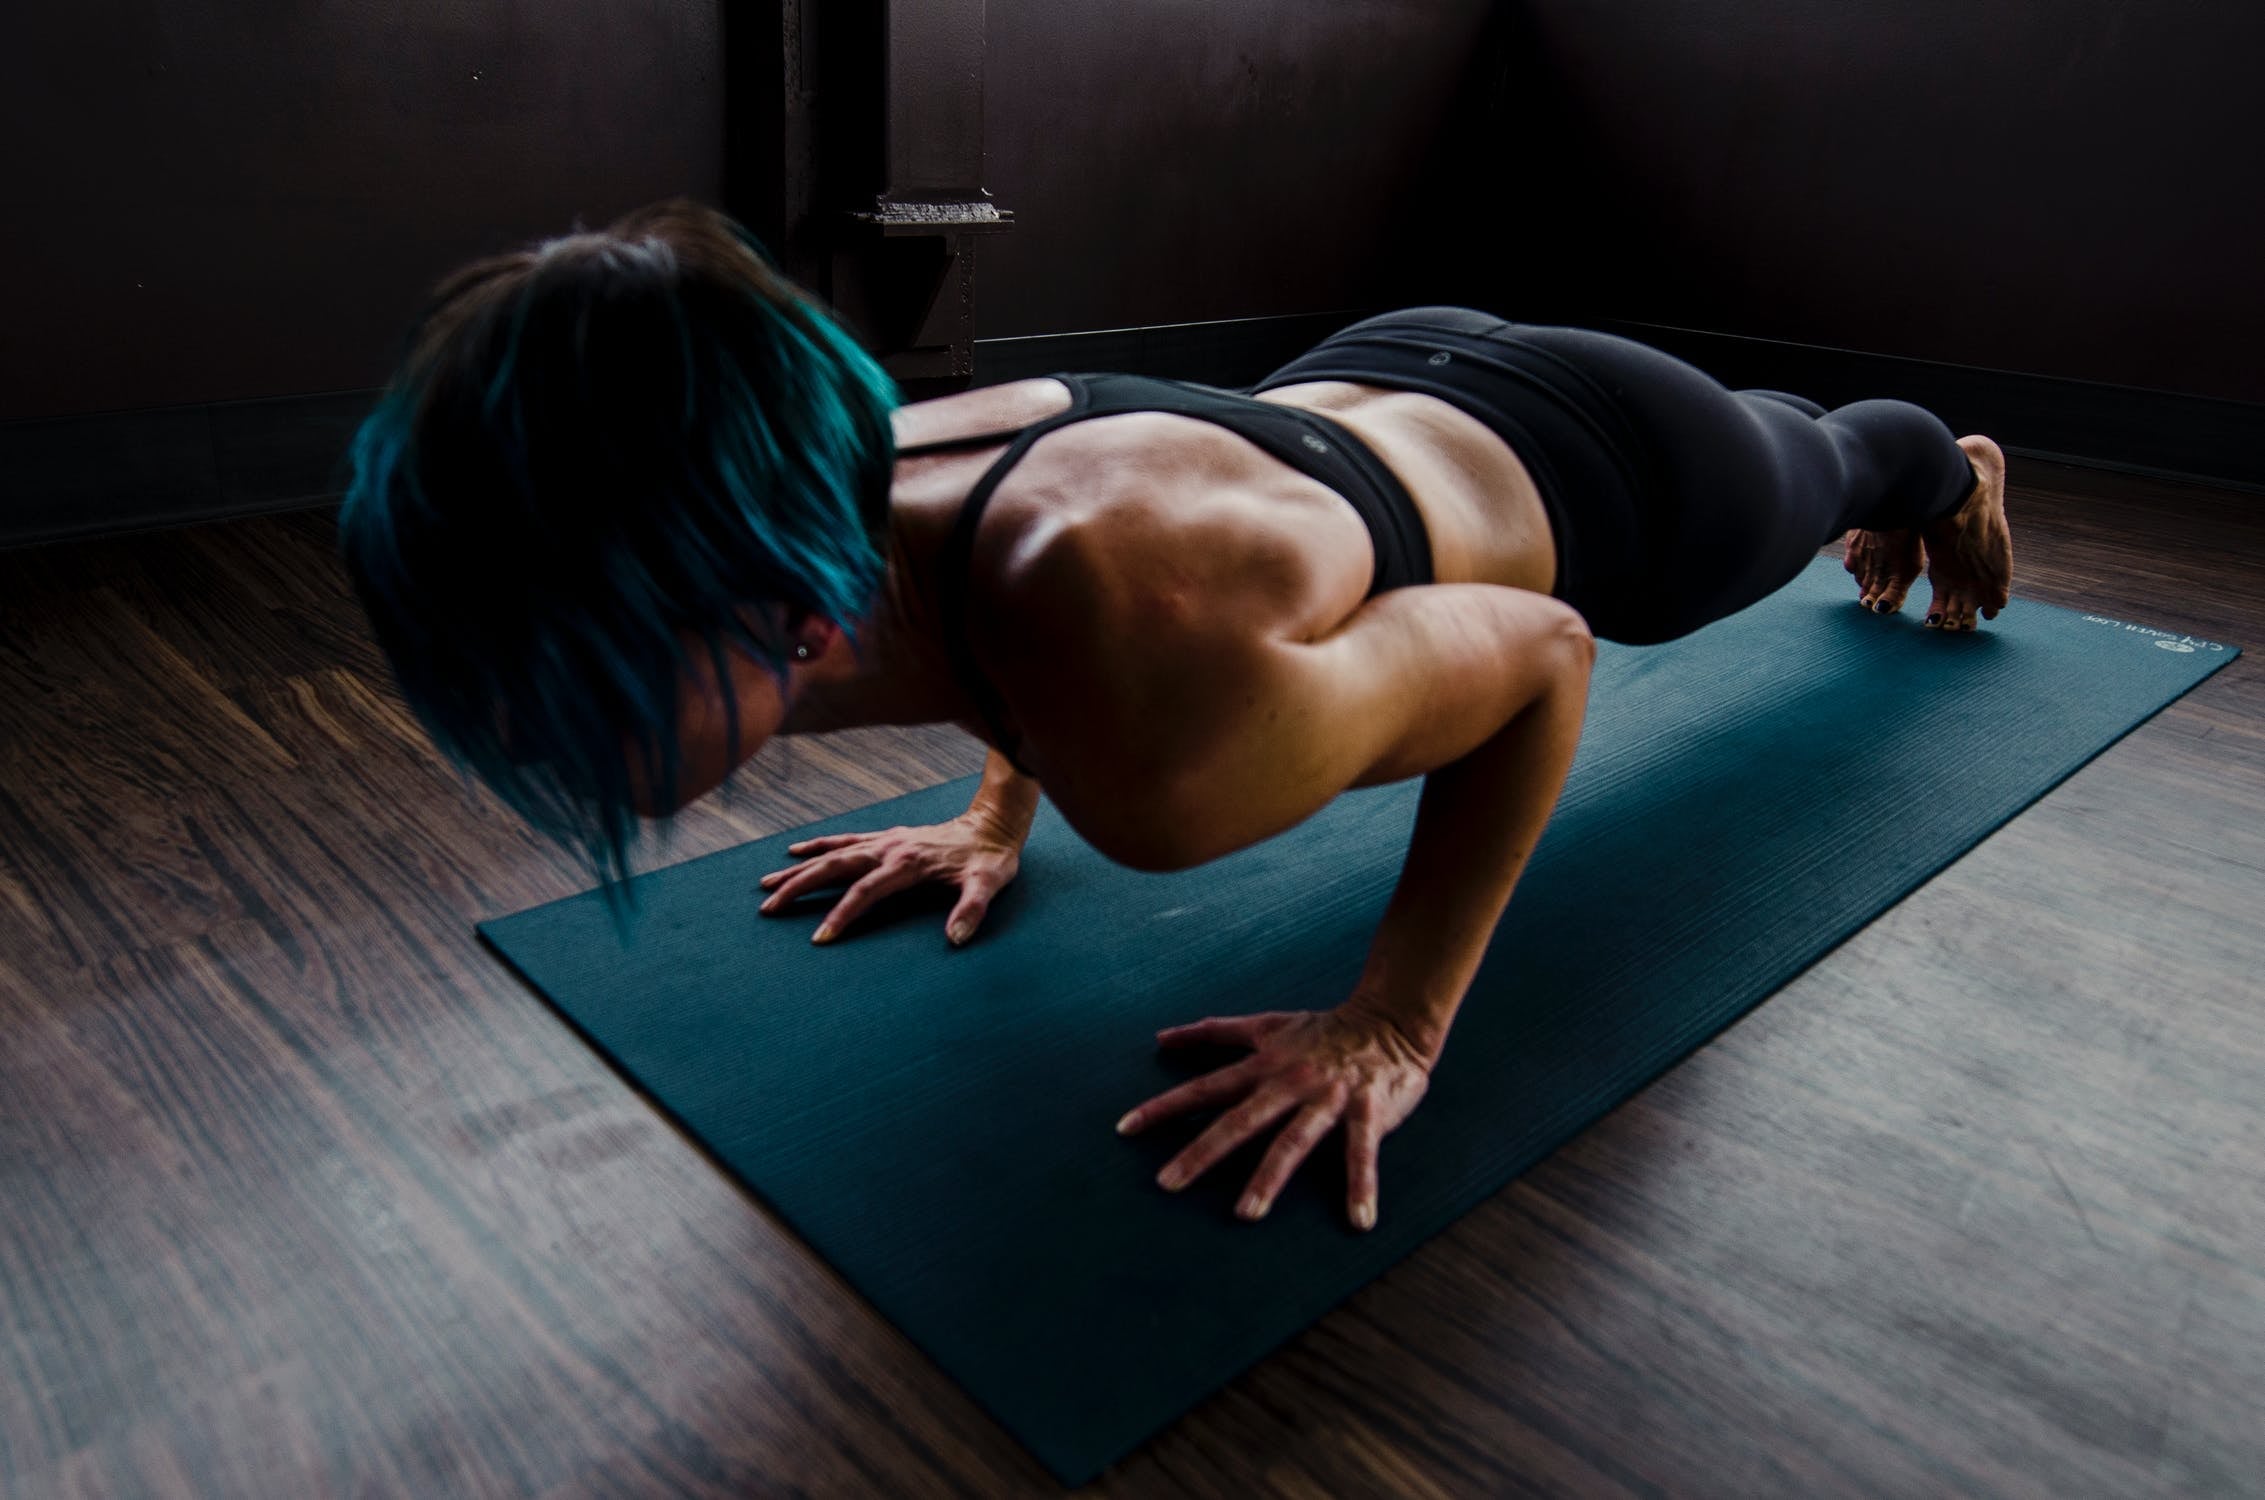 Chaturanga Modifications, The Best (and Worst) Alternatives